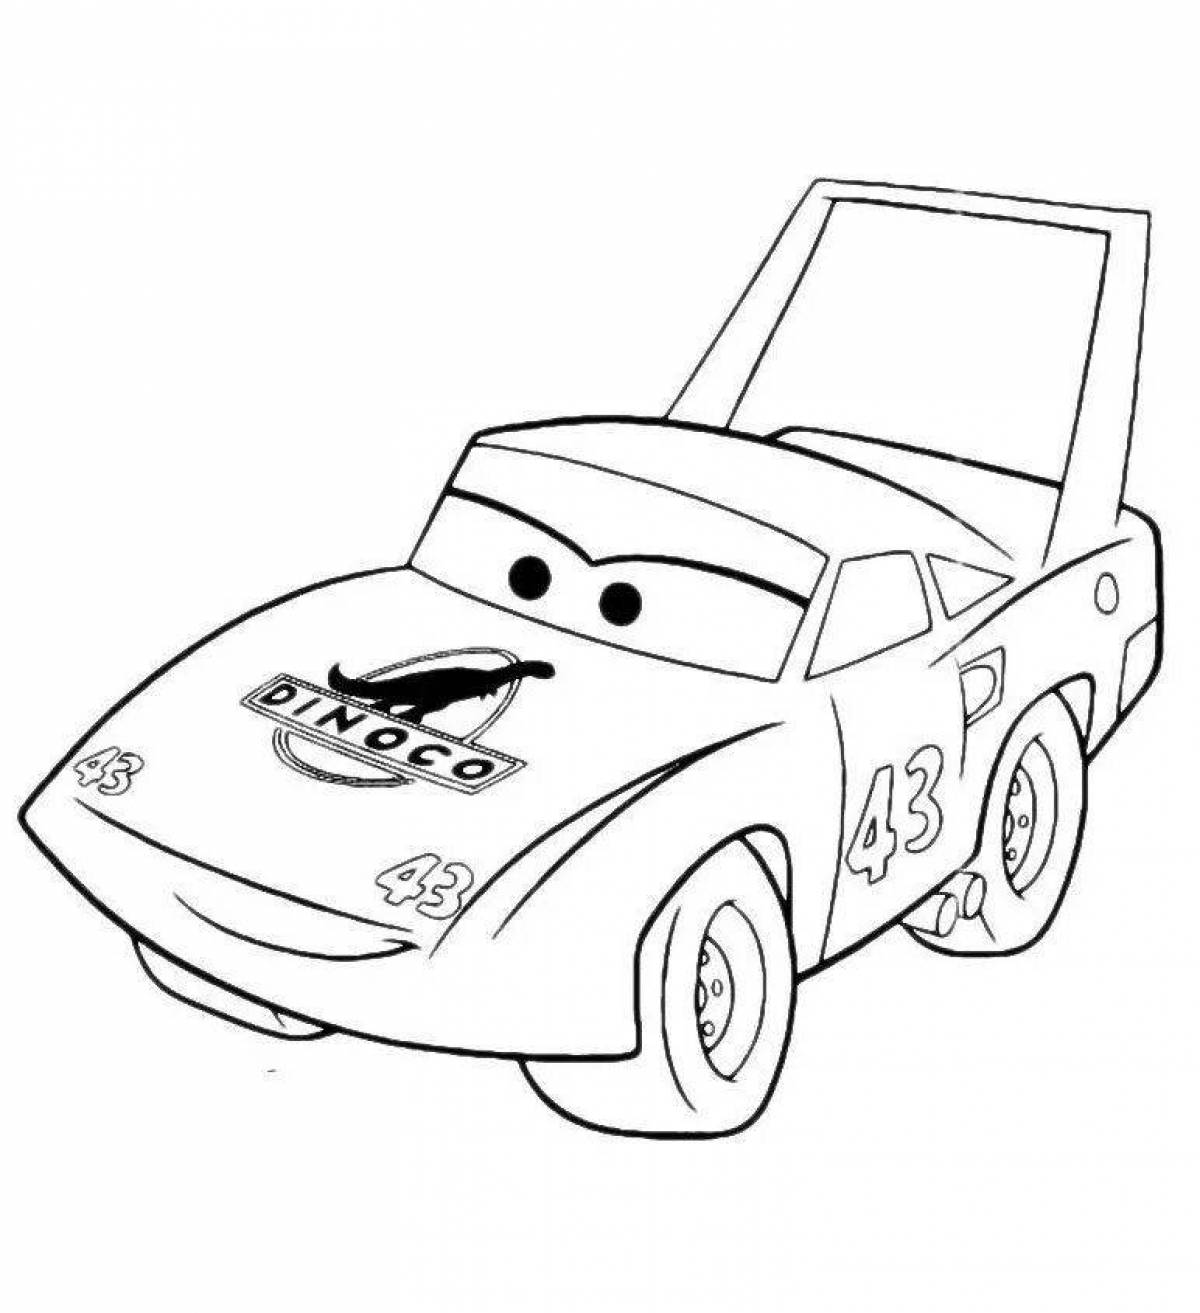 MacQueen's charming car coloring page